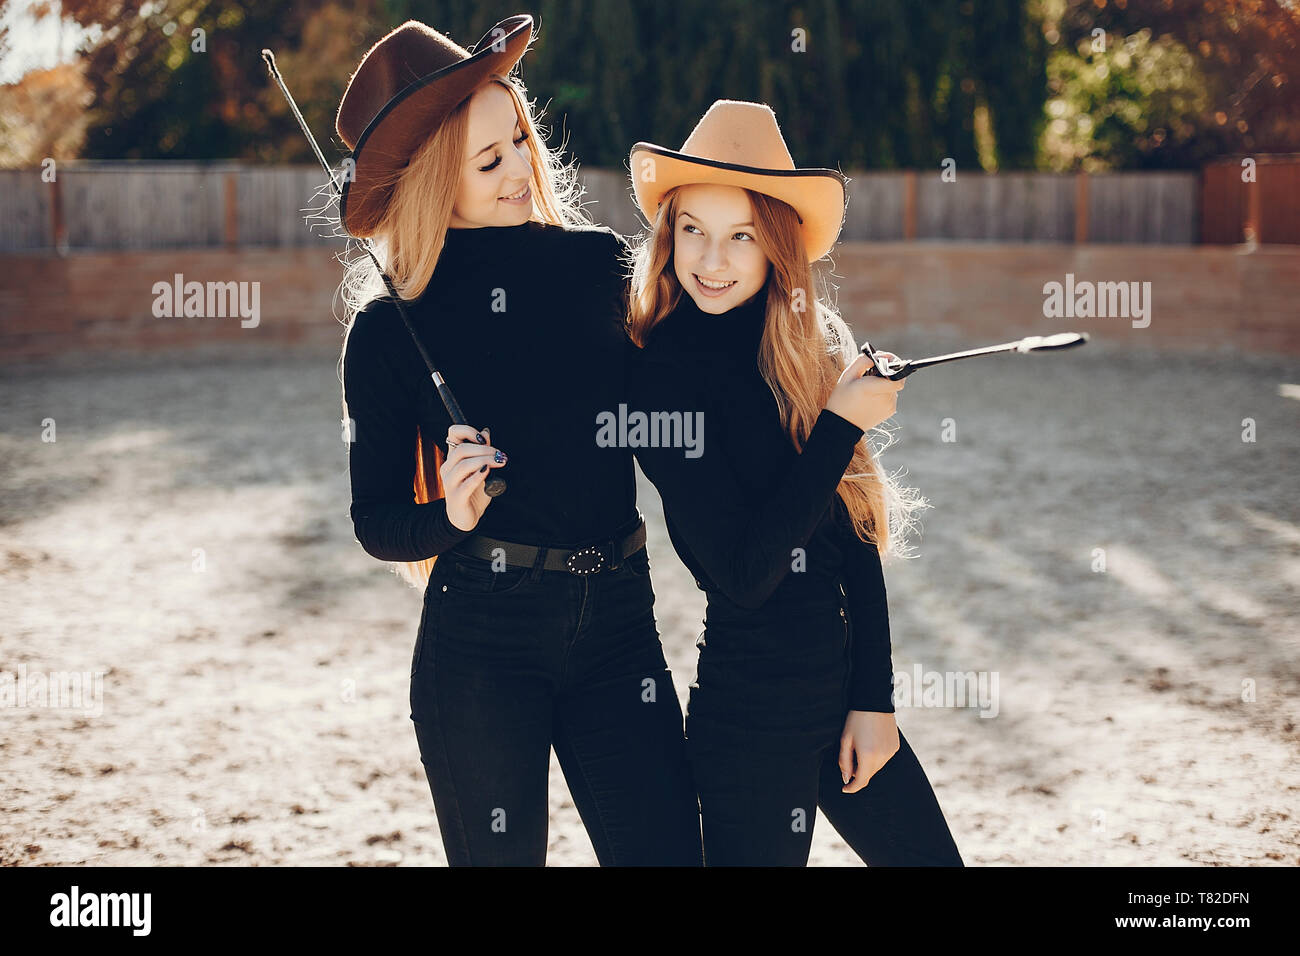 Girls in a hat. Cowboy style. Blonde in 